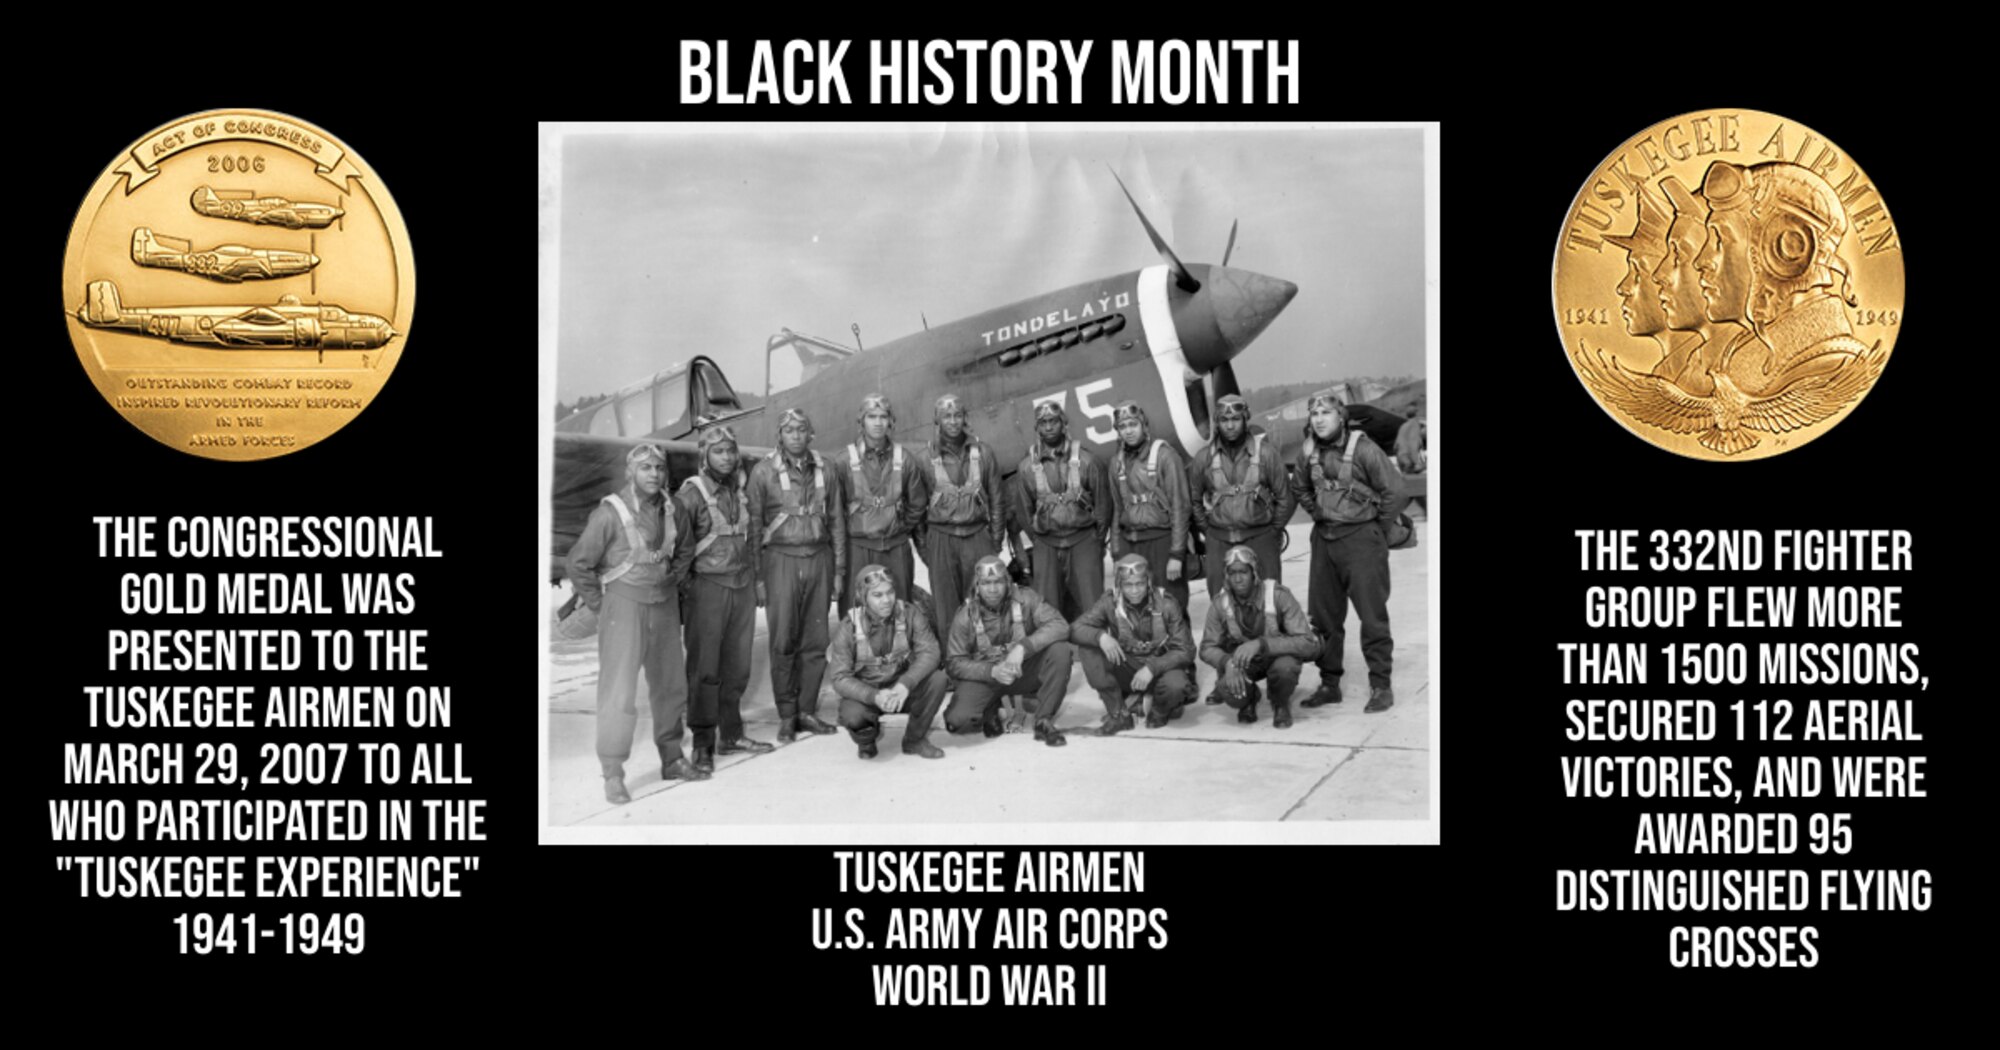 Every February, the U.S. recognizes Black History Month in order to showcase the challenges, victories and contributions of individuals throughout the nation’s history.